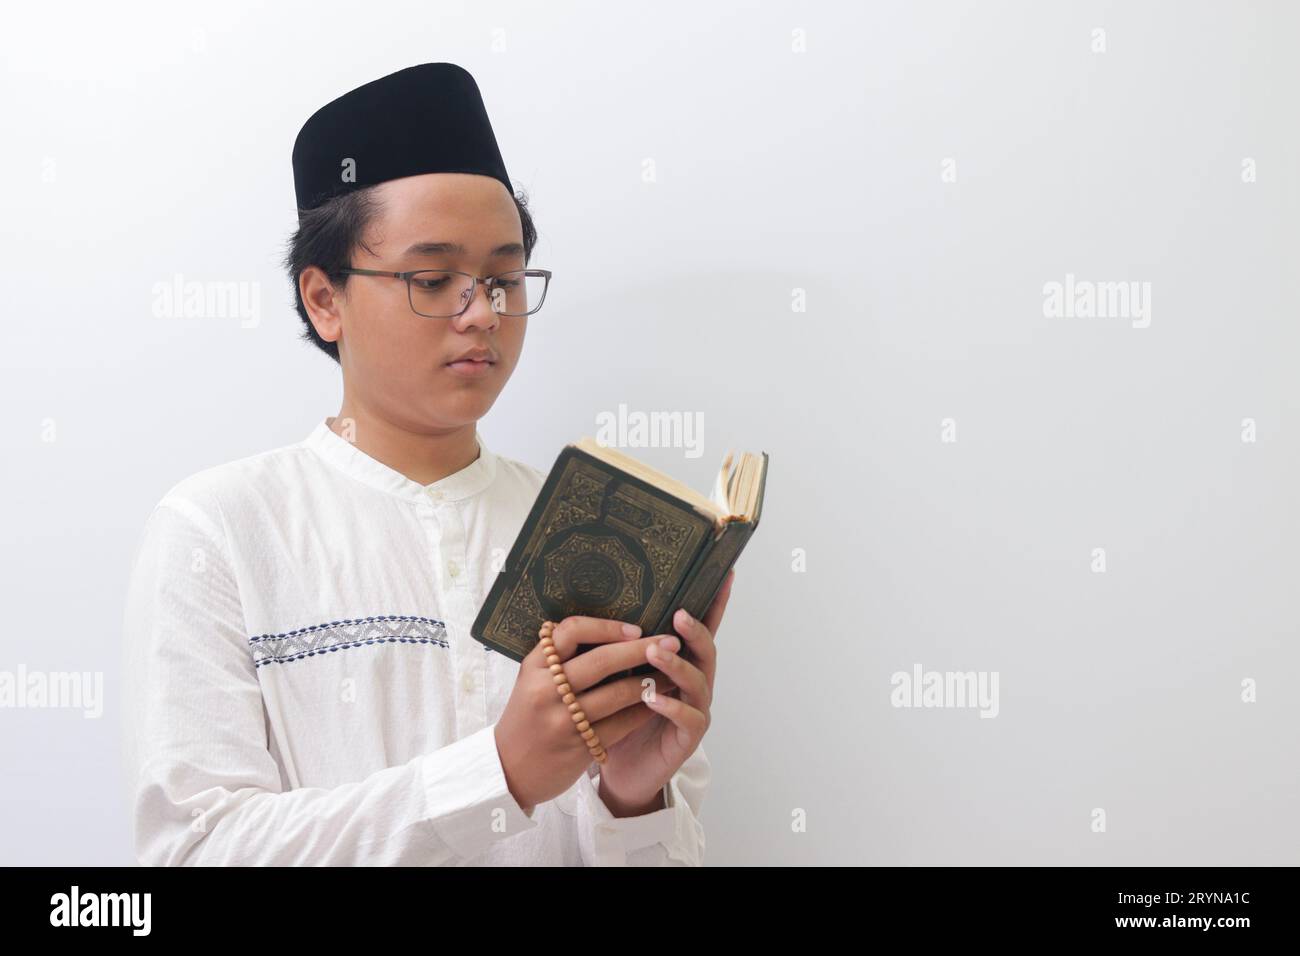 Portrait of young Asian muslim man reading and reciting Holy book of Quran seriously. Isolated image on white background Stock Photo